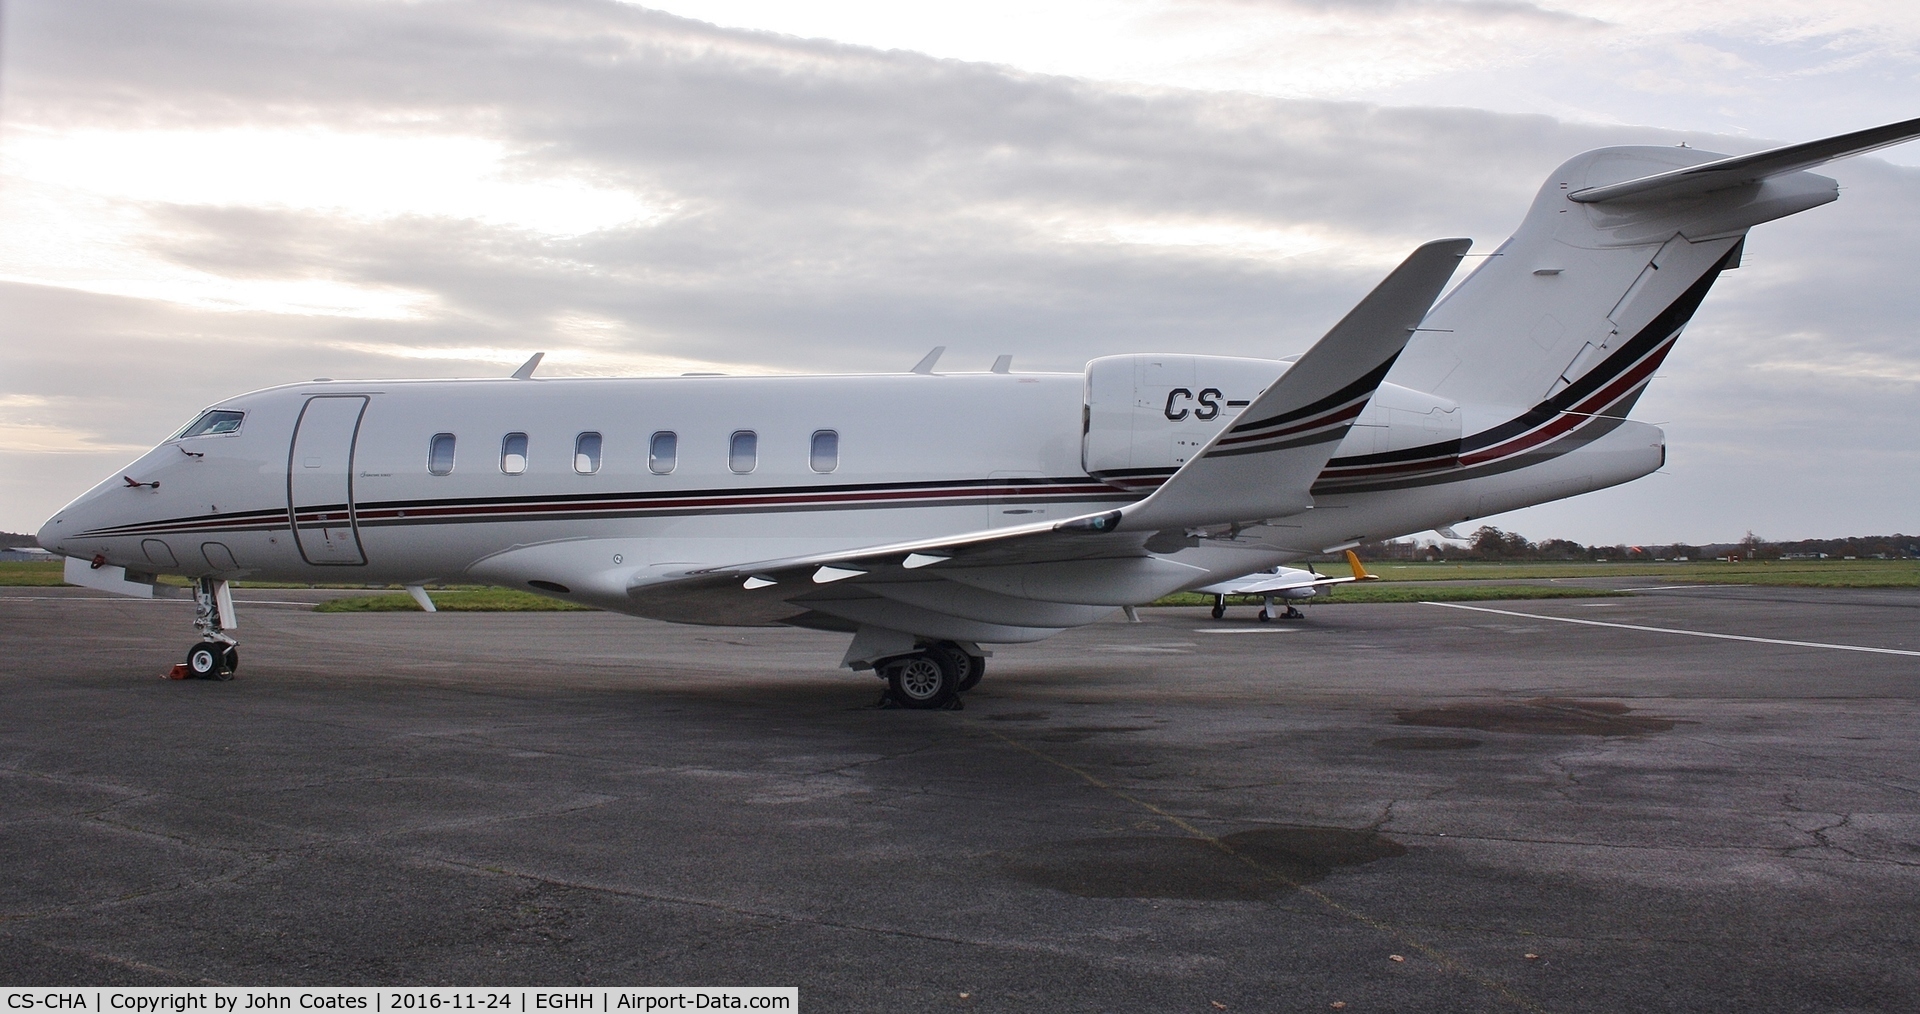 CS-CHA, 2014 Bombardier Challenger 350 (BD-100-1A10) C/N 20544, Visitor at Signatures